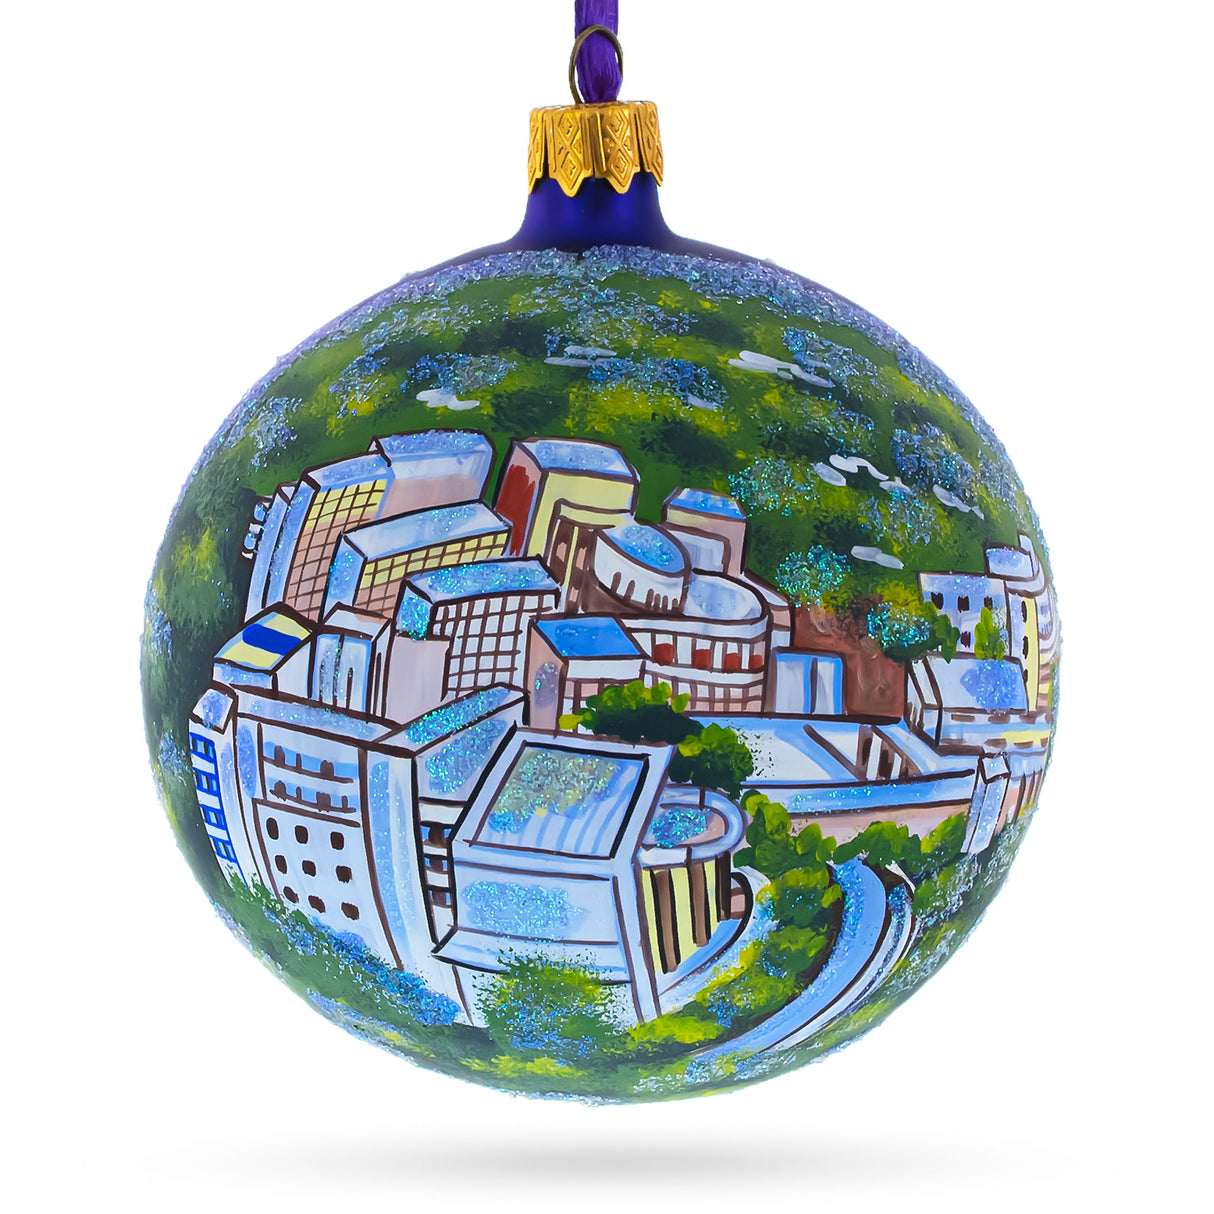 Los Angeles, California, USA Glass Ball Christmas Ornament 4 Inches in Multi color, Round shape